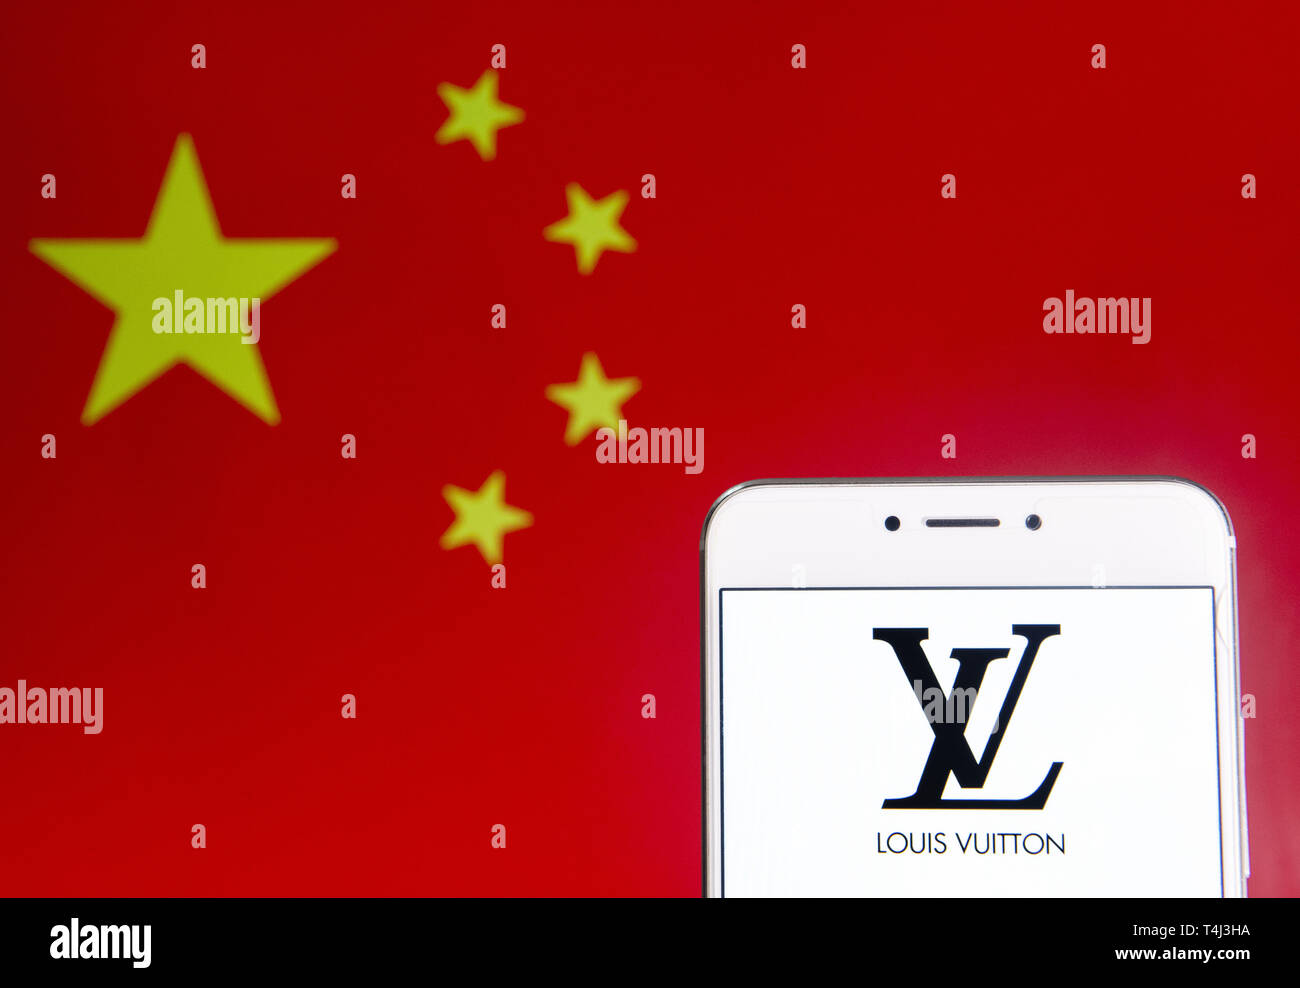 April 6, 2019 - Hong Kong - In this photo illustration a French luxury fashion brand Louis Vuitton logo is seen on an Android mobile device with People's Republic of China flag in the background. (Credit Image: © Budrul Chukrut/SOPA Images via ZUMA Wire) Stock Photo